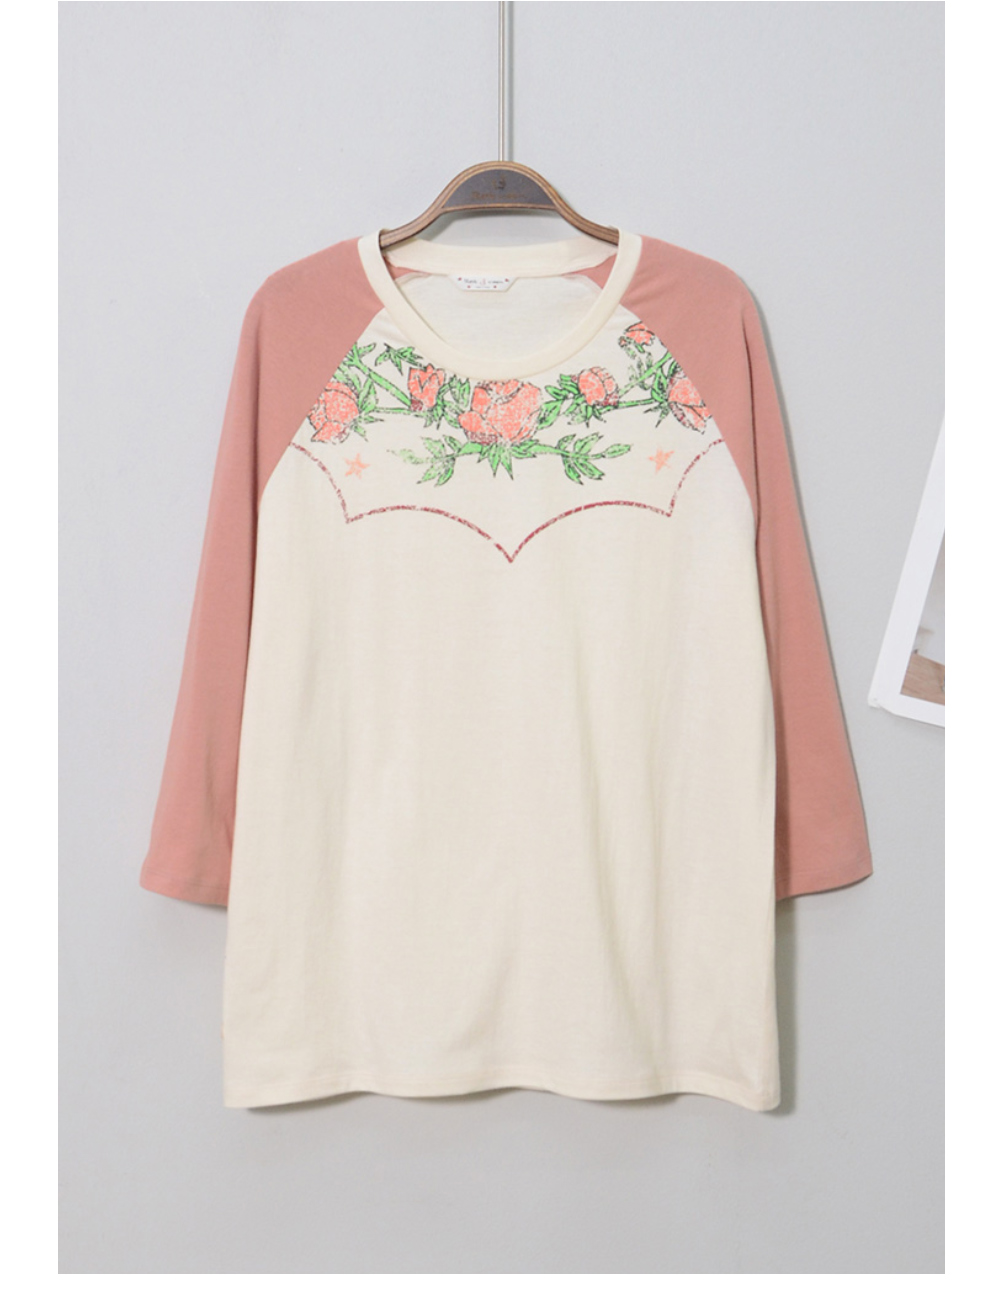 short sleeved tee cream color image-S1L39